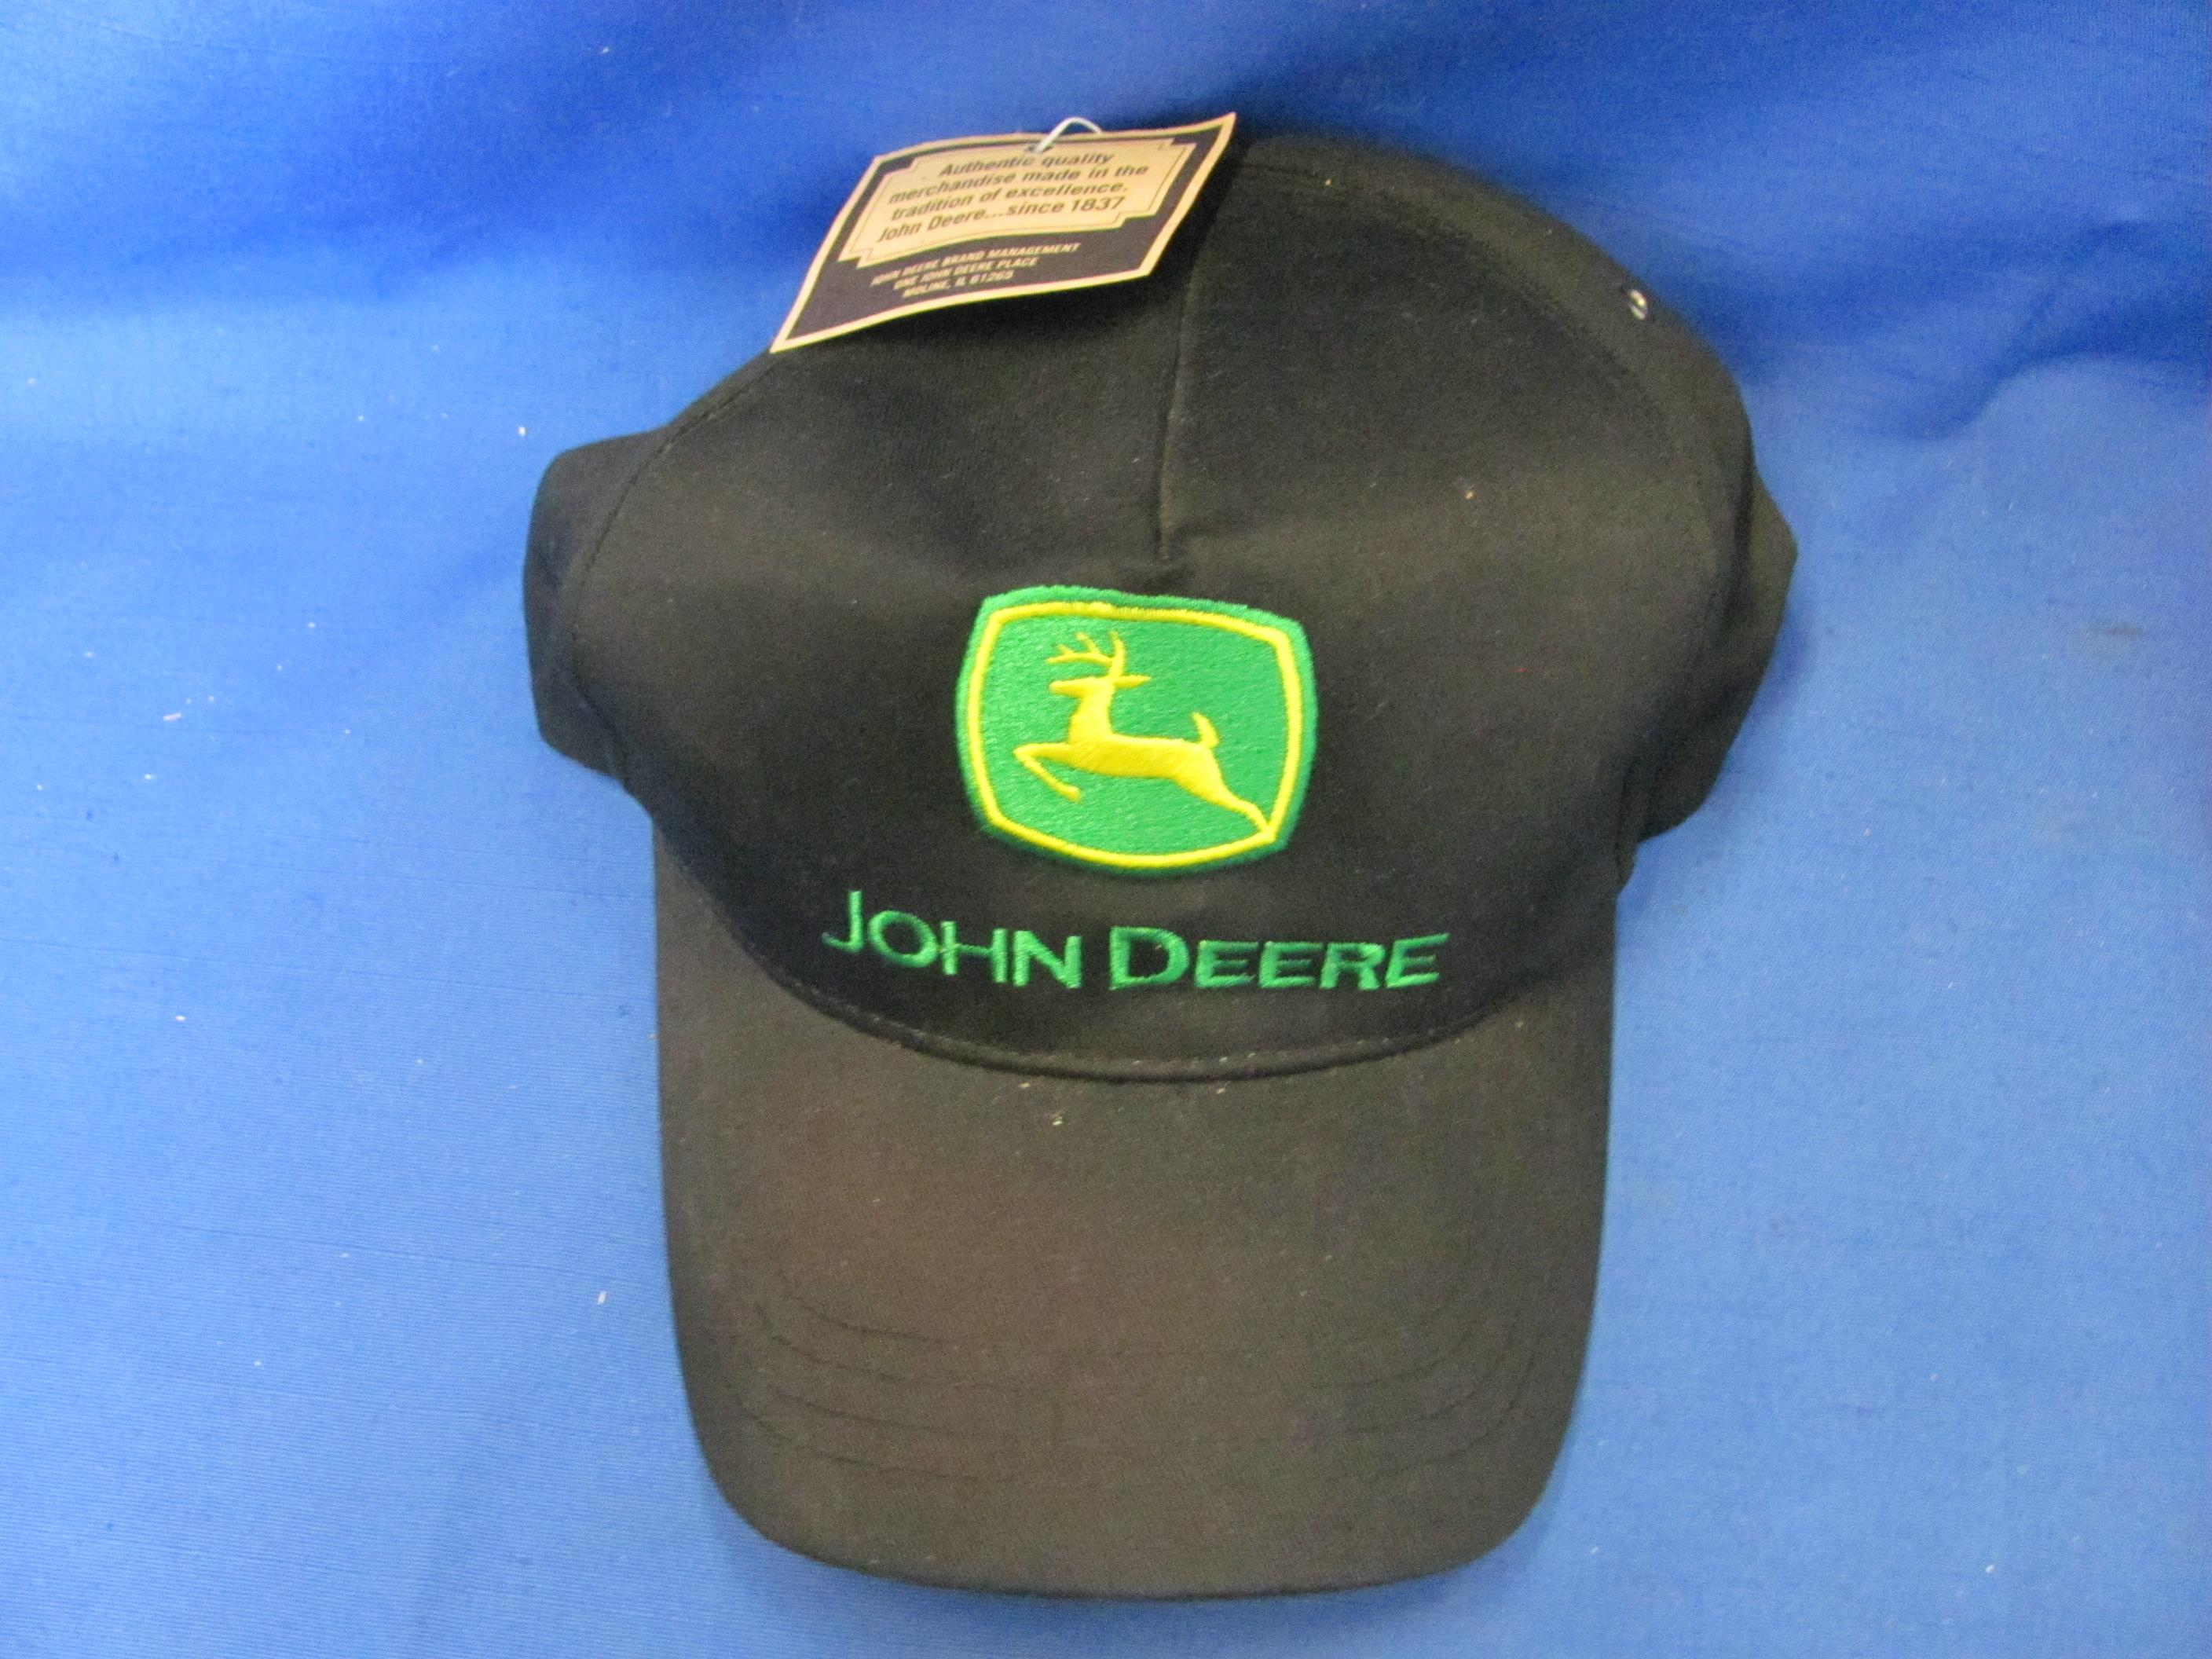 6 Adult Size Adjustable Ball Caps – 3 New w/ Tags: Winchester, John Deere, Nascar M&Ms, Case IH, Pio